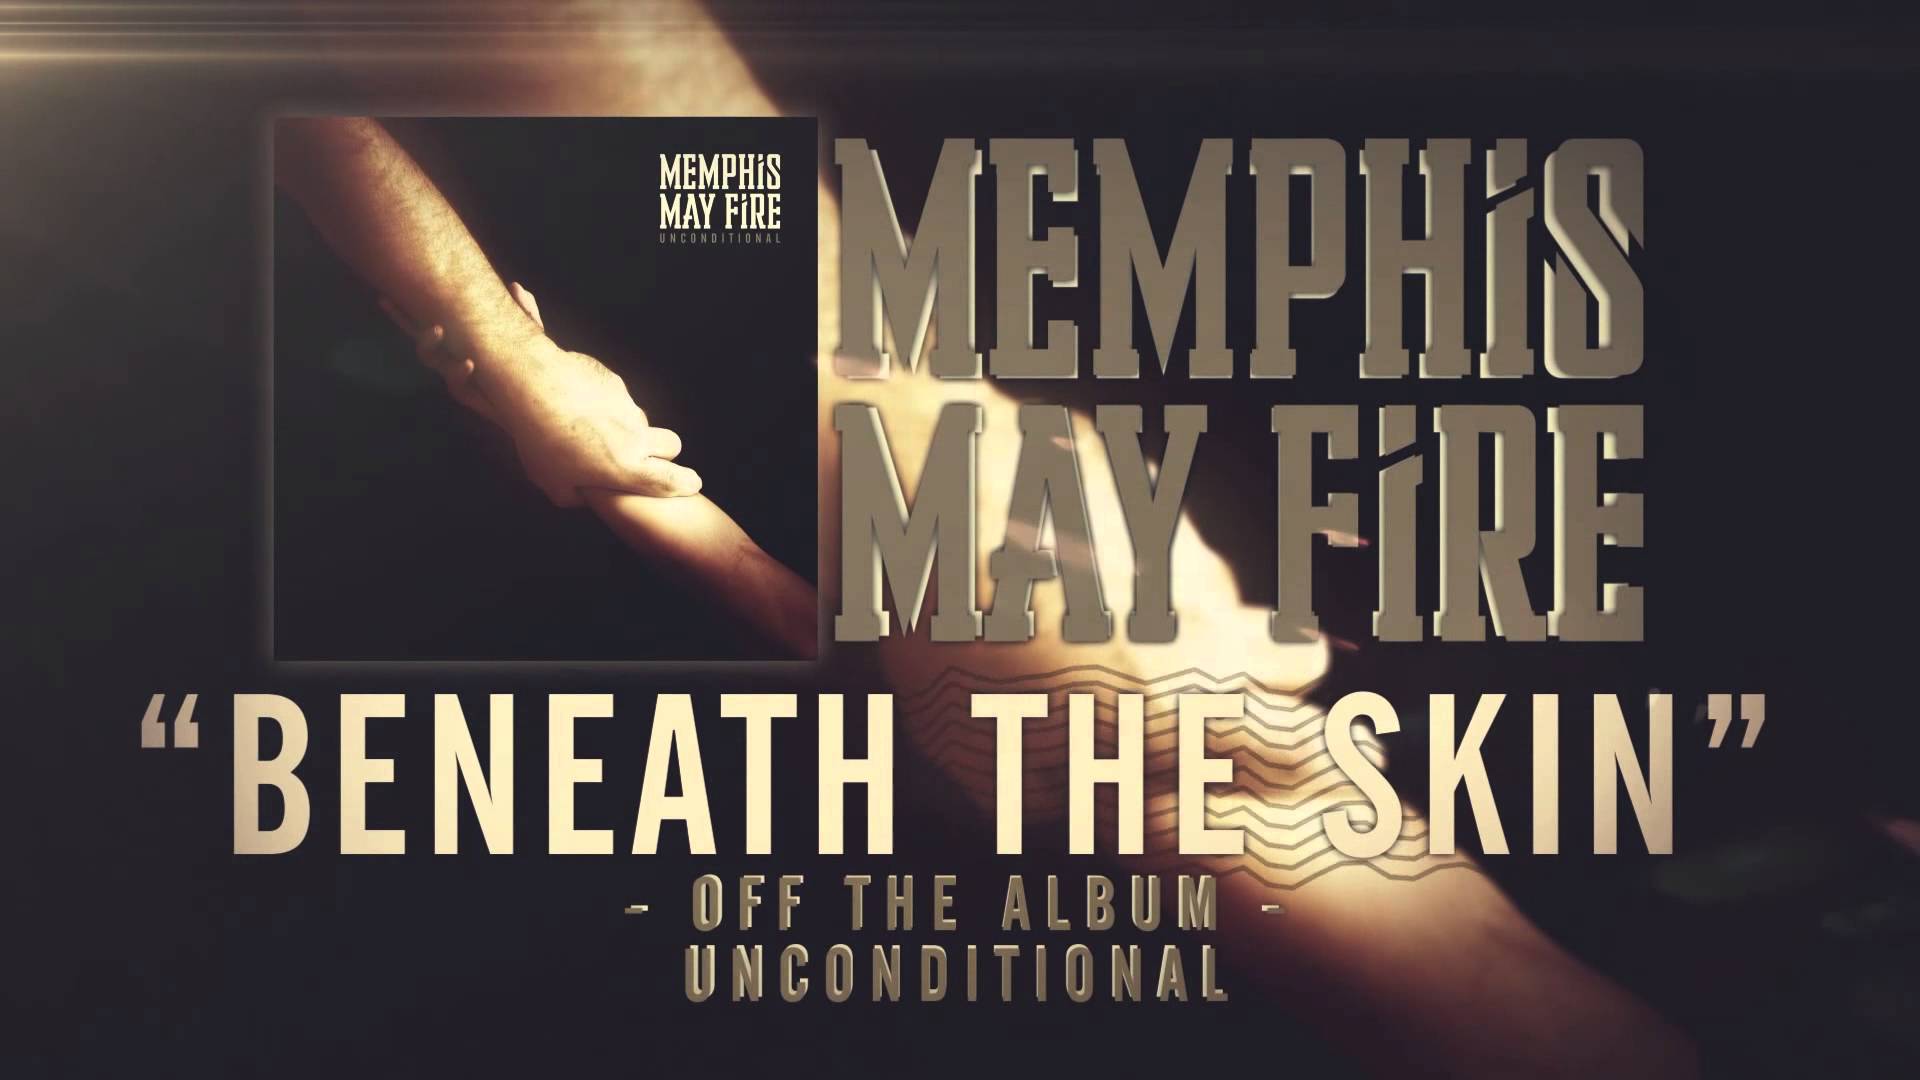 Memphis May Fire releases new track “Beneath The Skin”